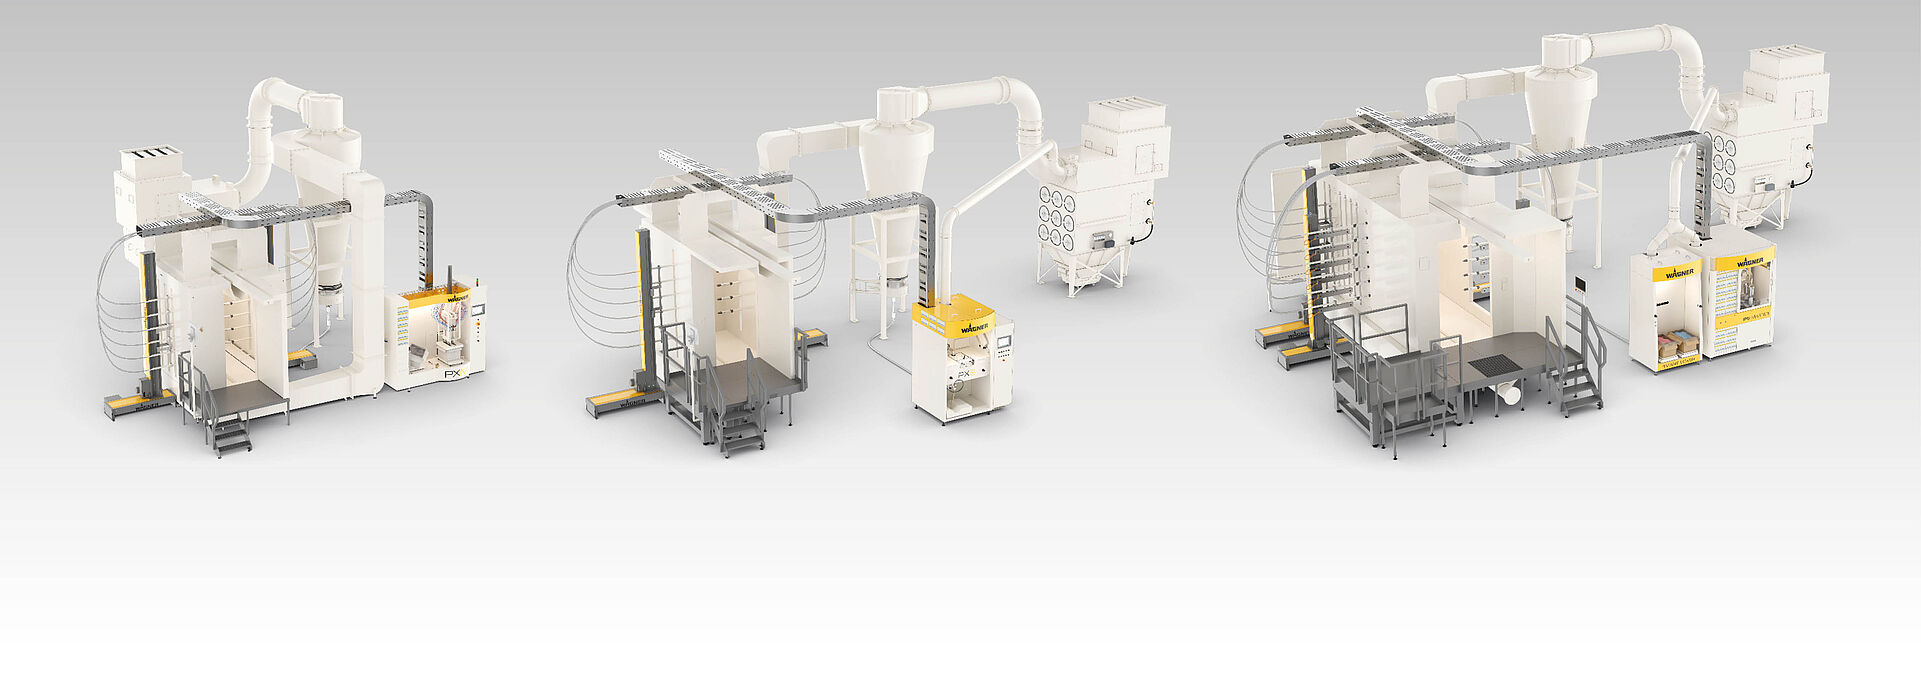 Complete Powder Coating Systems for Automated Processes